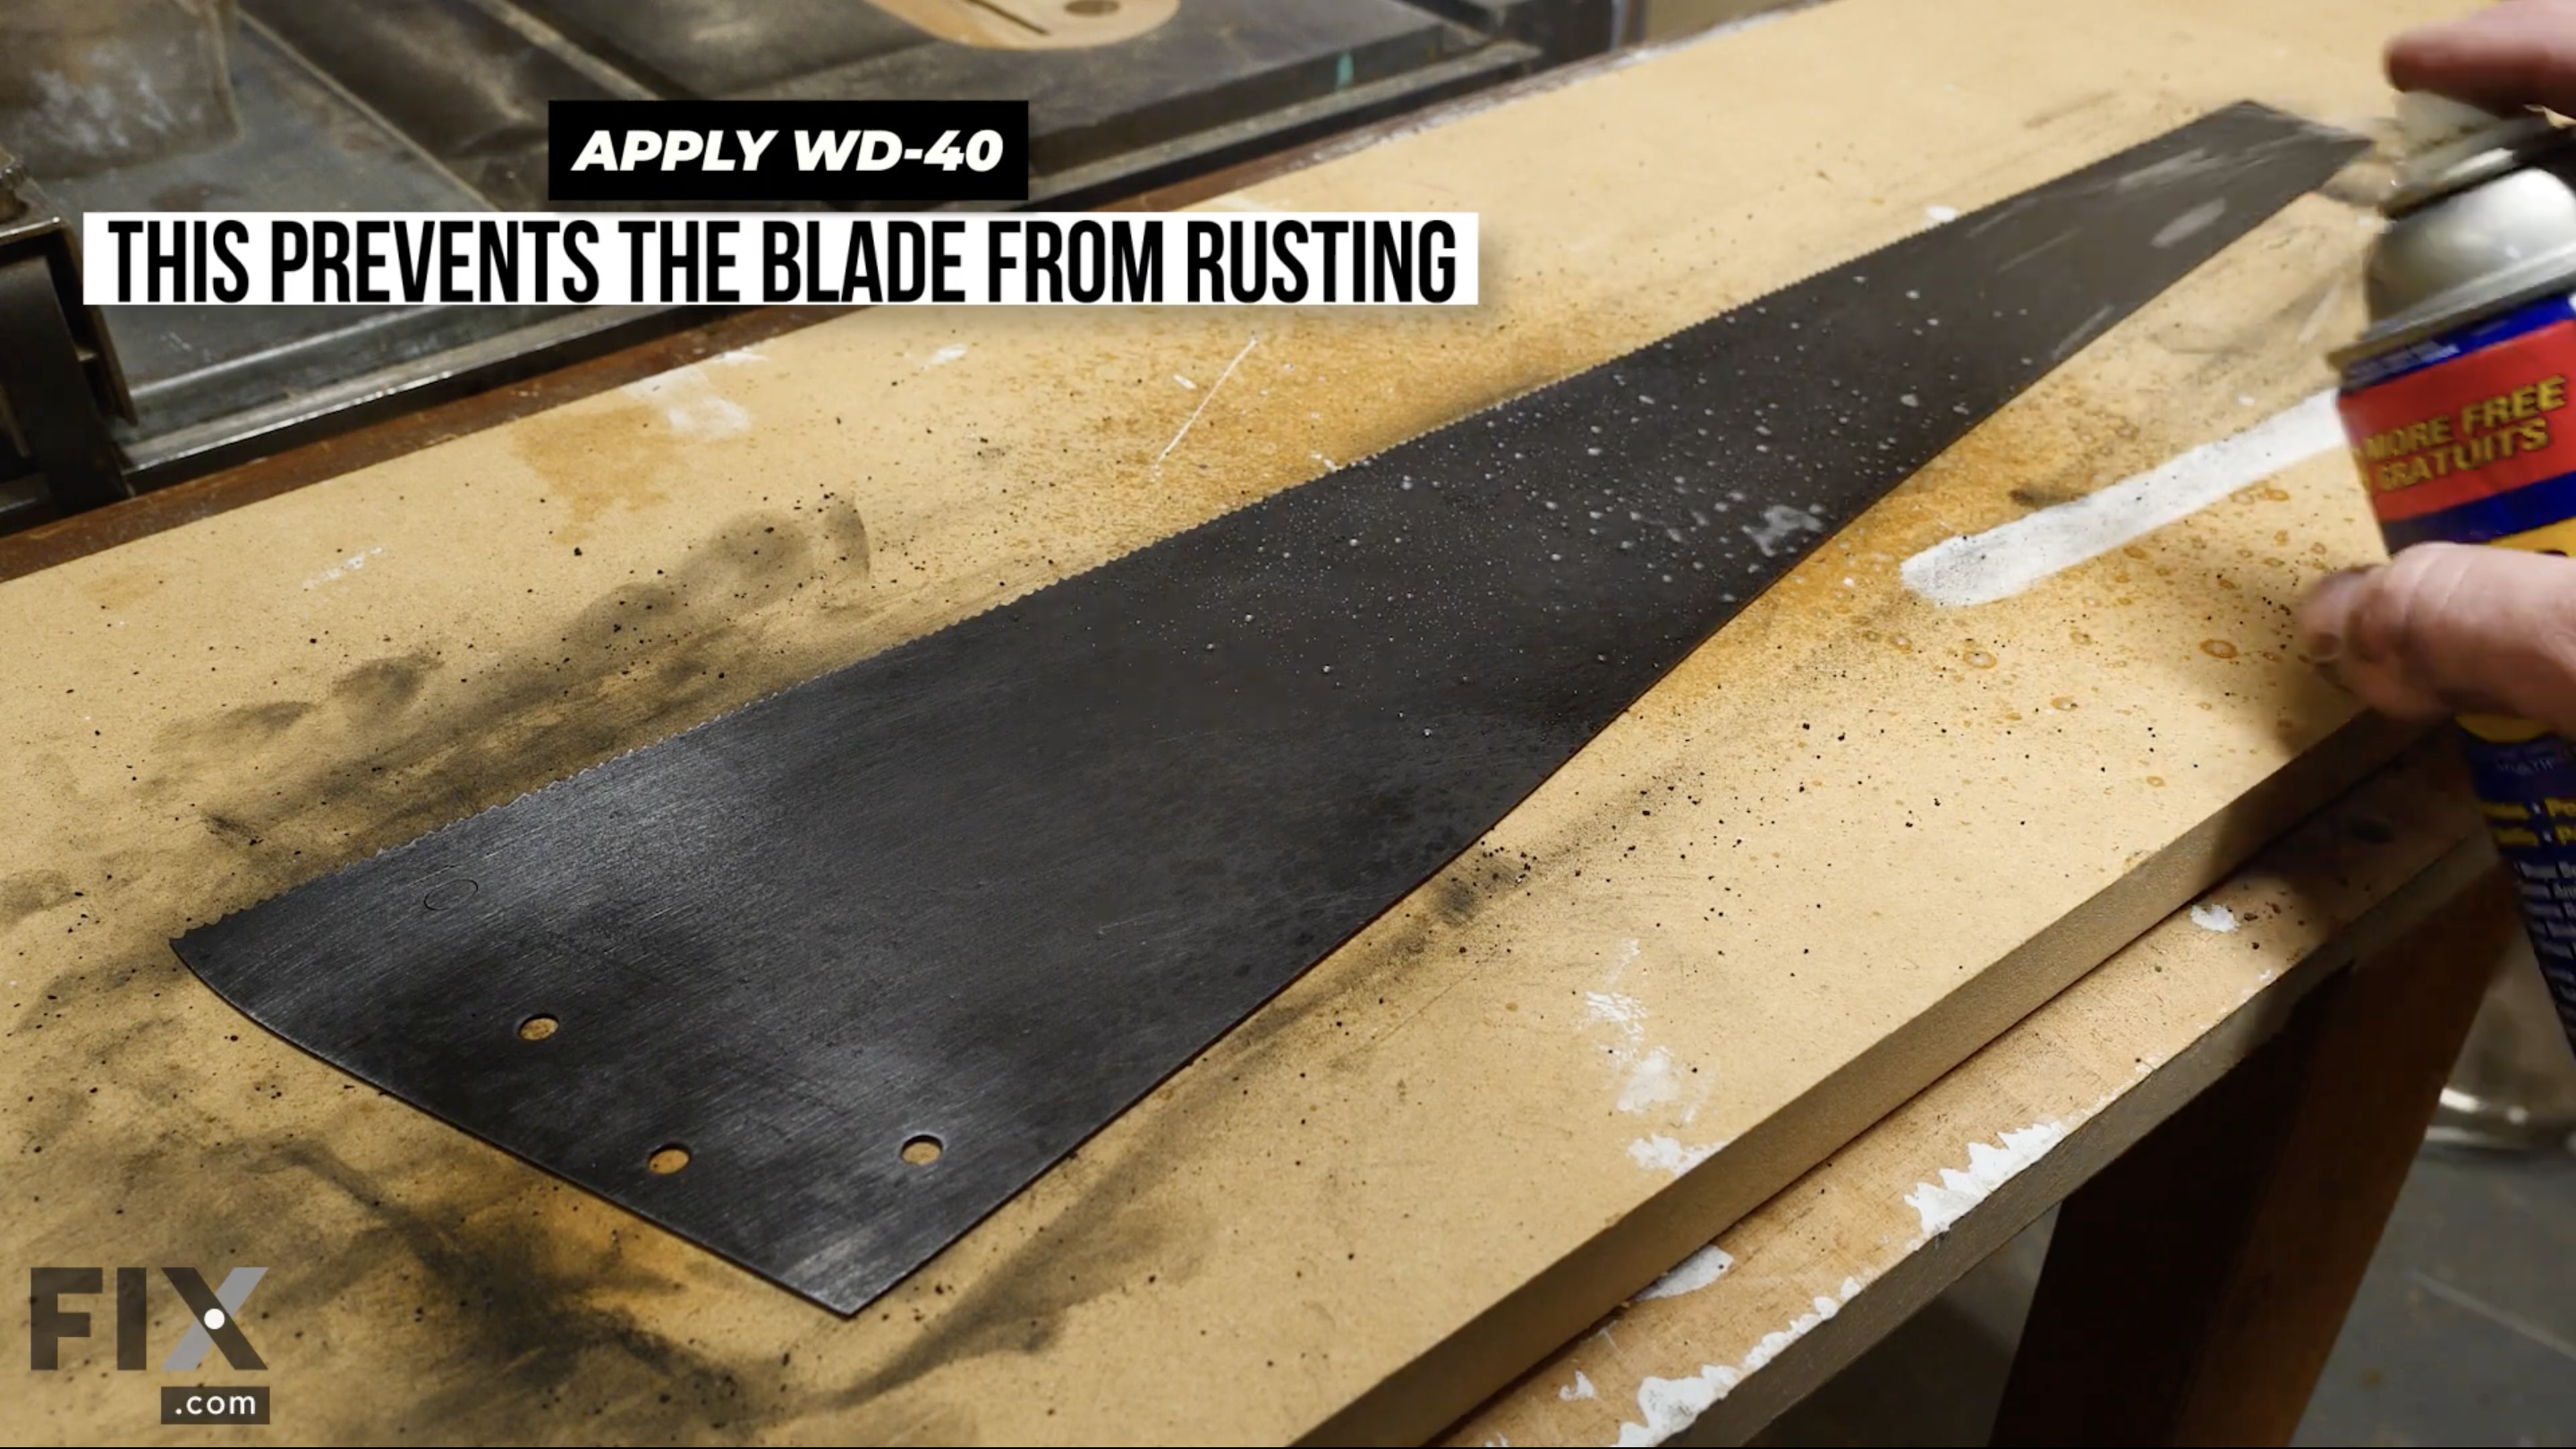 Spray and rub in a healthy coat of WD-40 to complete the restoration of your hand saw or whatever tools you may be restoring.